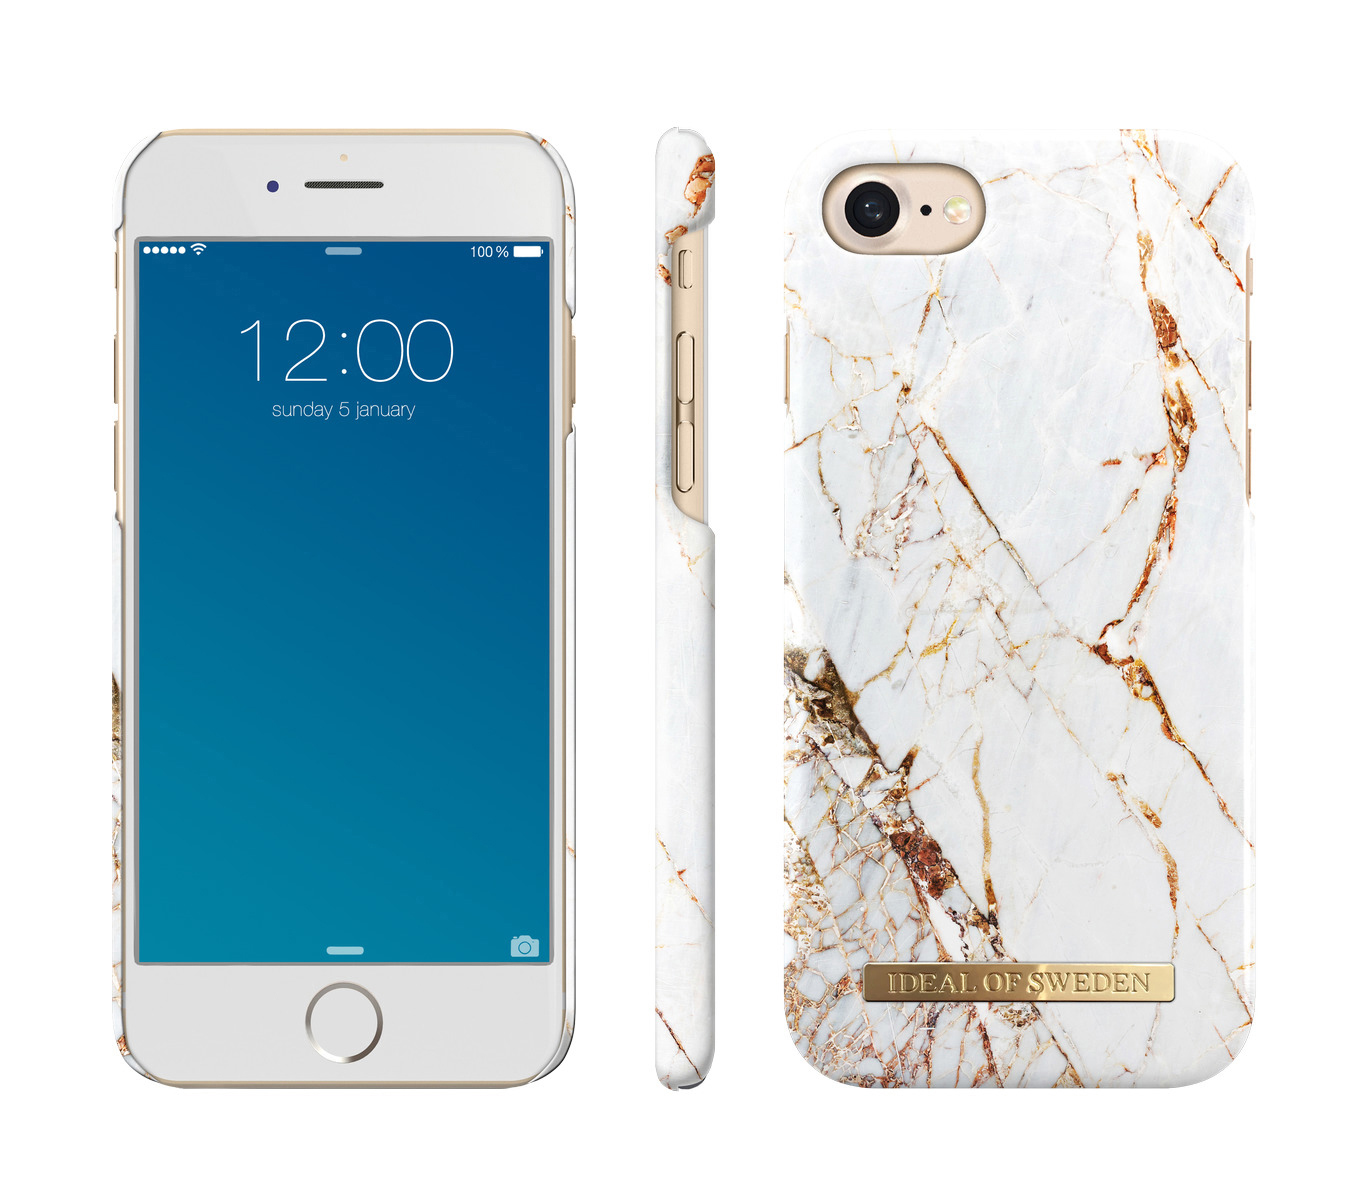 SWEDEN OF Backcover, 8, iPhone Carrara iPhone Apple, Fashion, IDEAL iPhone 6, 7, Gold